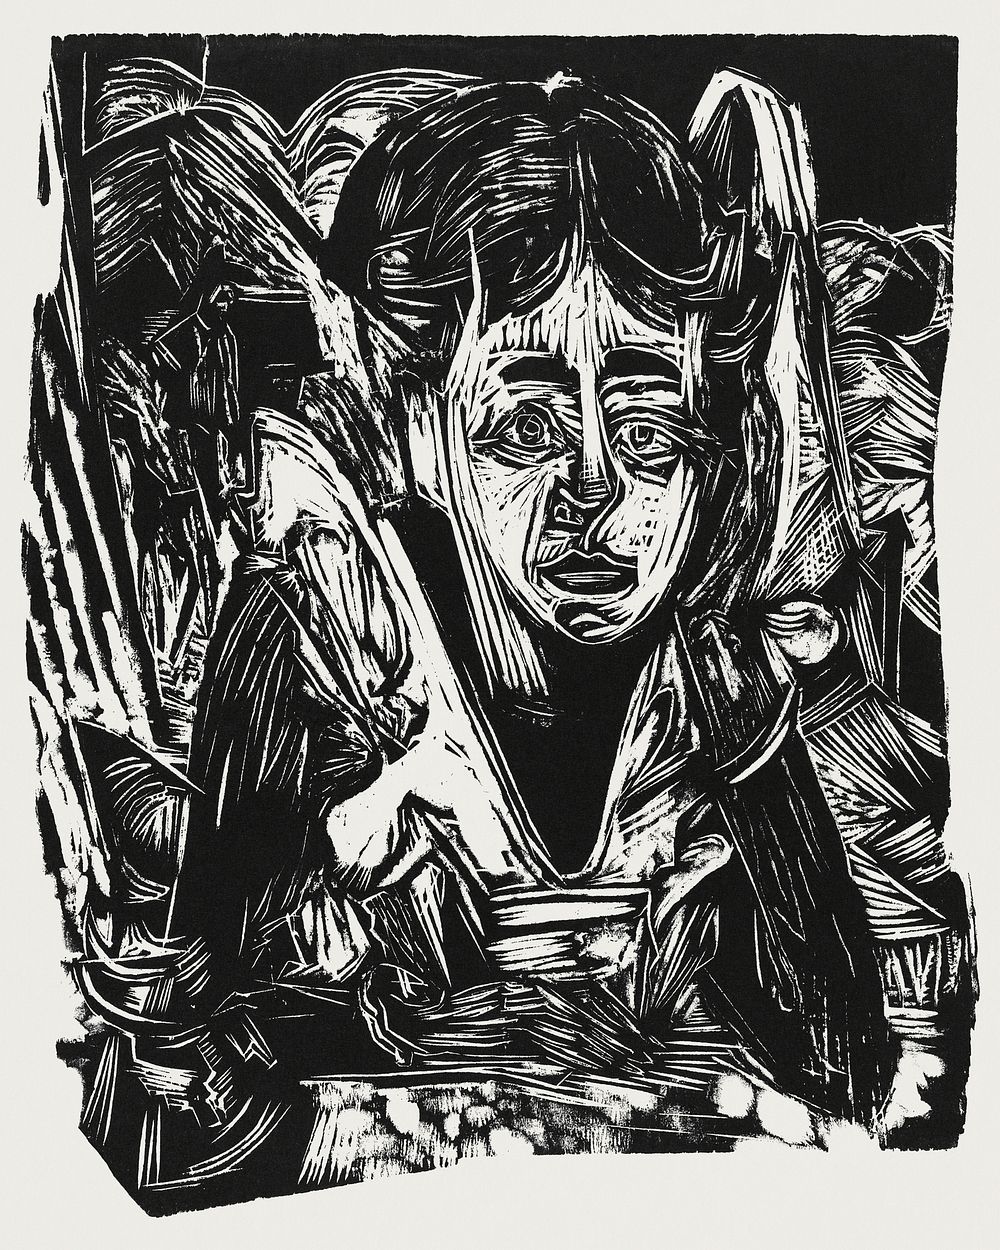 Girl Dreaming (1918) print in high resolution by Ernst Ludwig Kirchner. Original from The National Gallery of Art. Digitally…